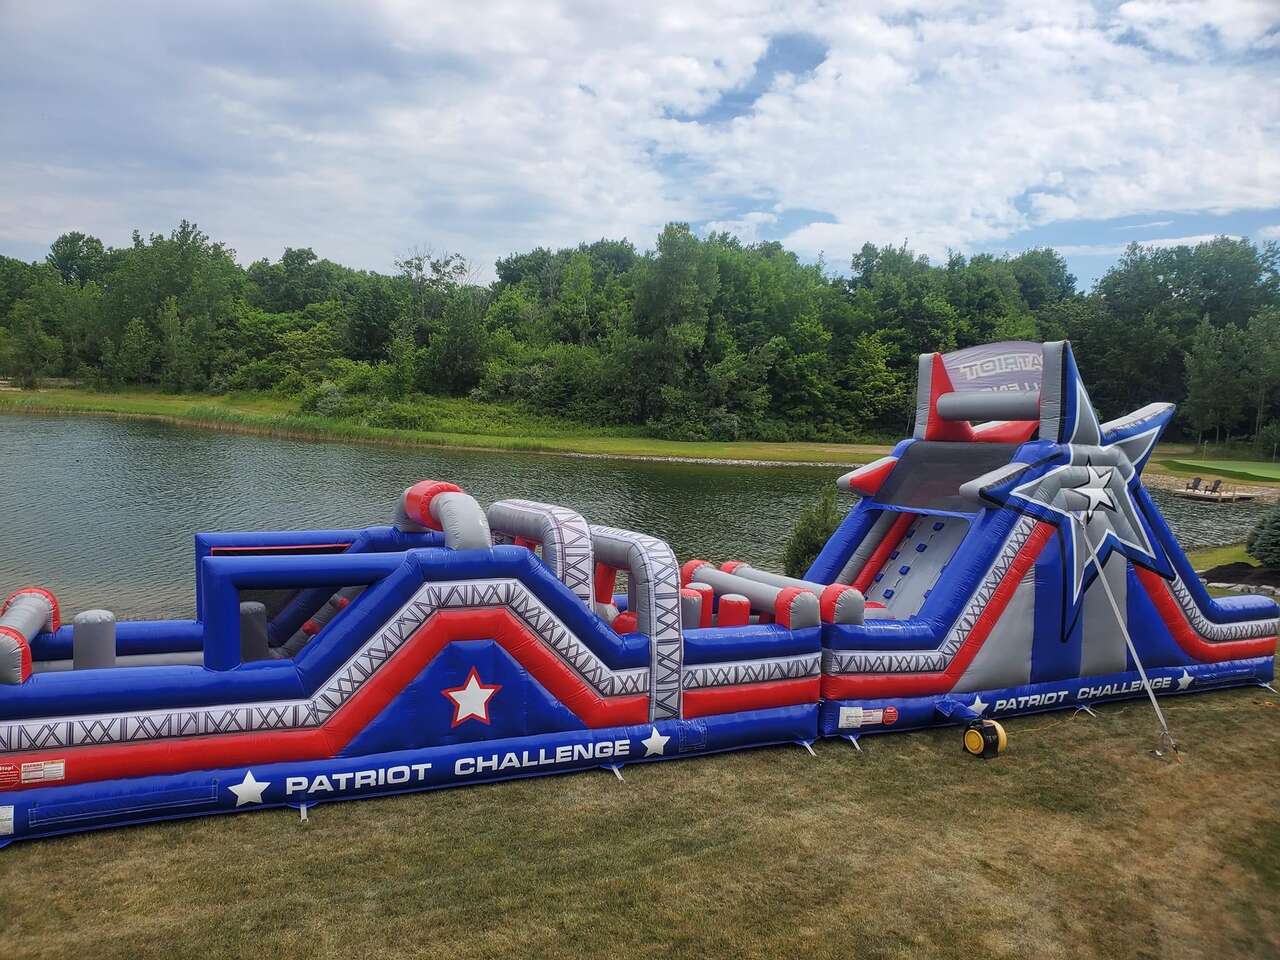 obstacles courses rental, from Fun Bounces Rental in Dwight IL 60420